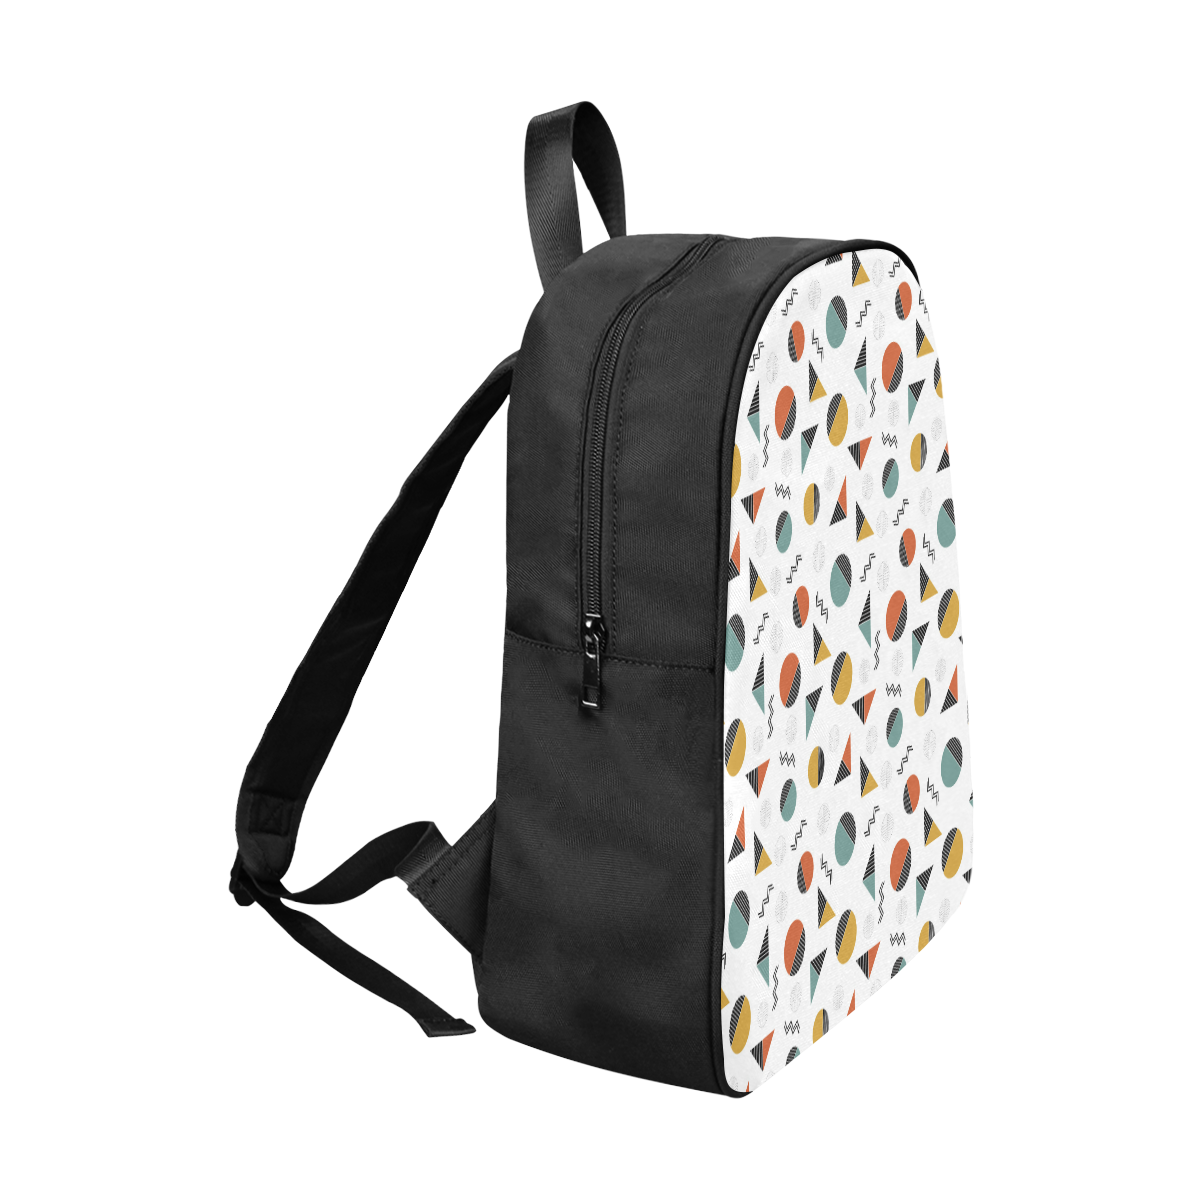 Geo Cutting Shapes Fabric School Backpack (Model 1682) (Large)